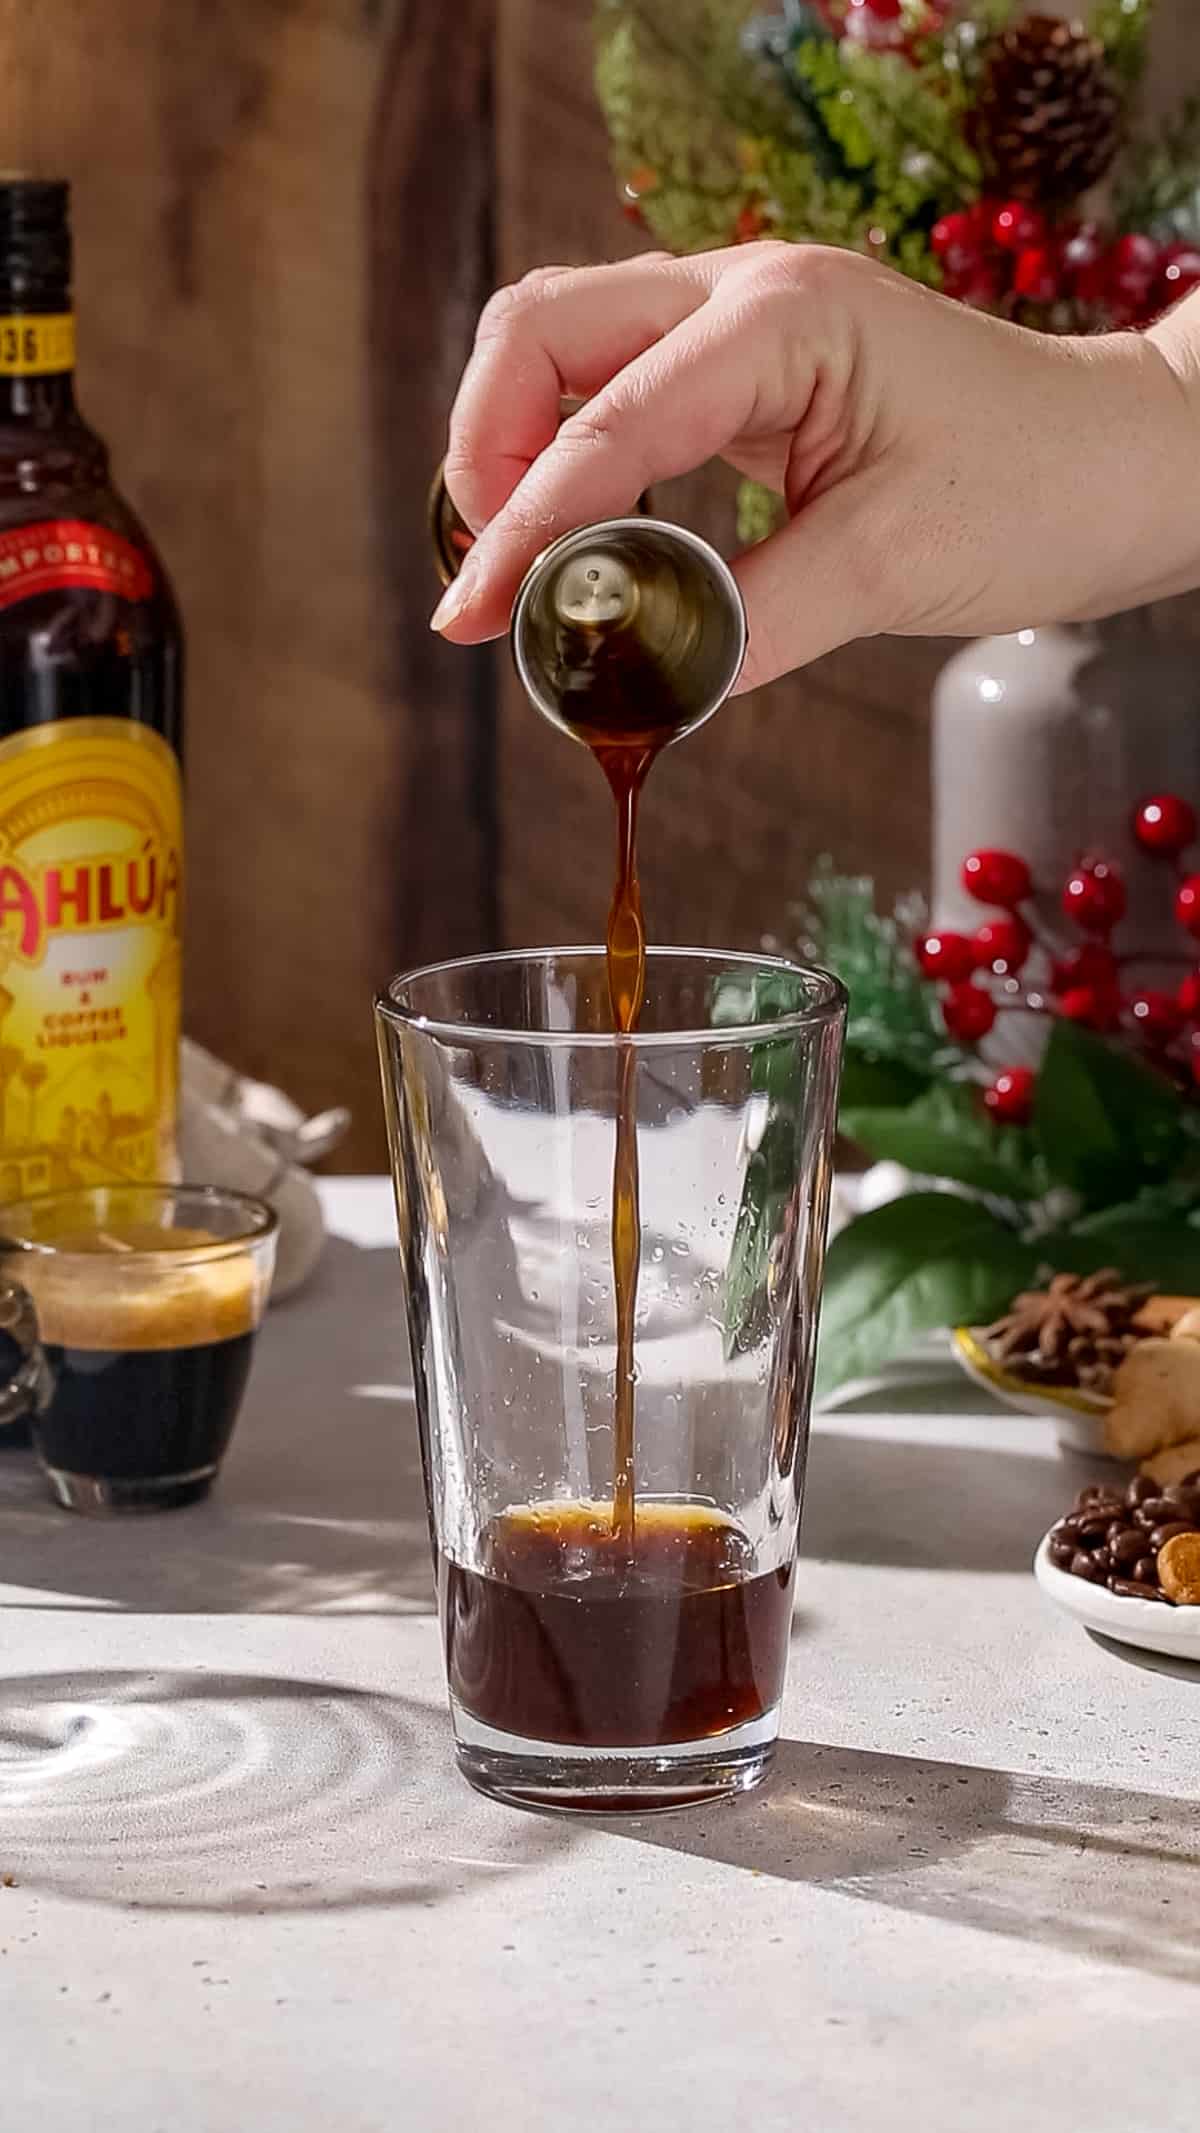 Hand using a jigger to add gingerbread syrup to a cocktail shaker.